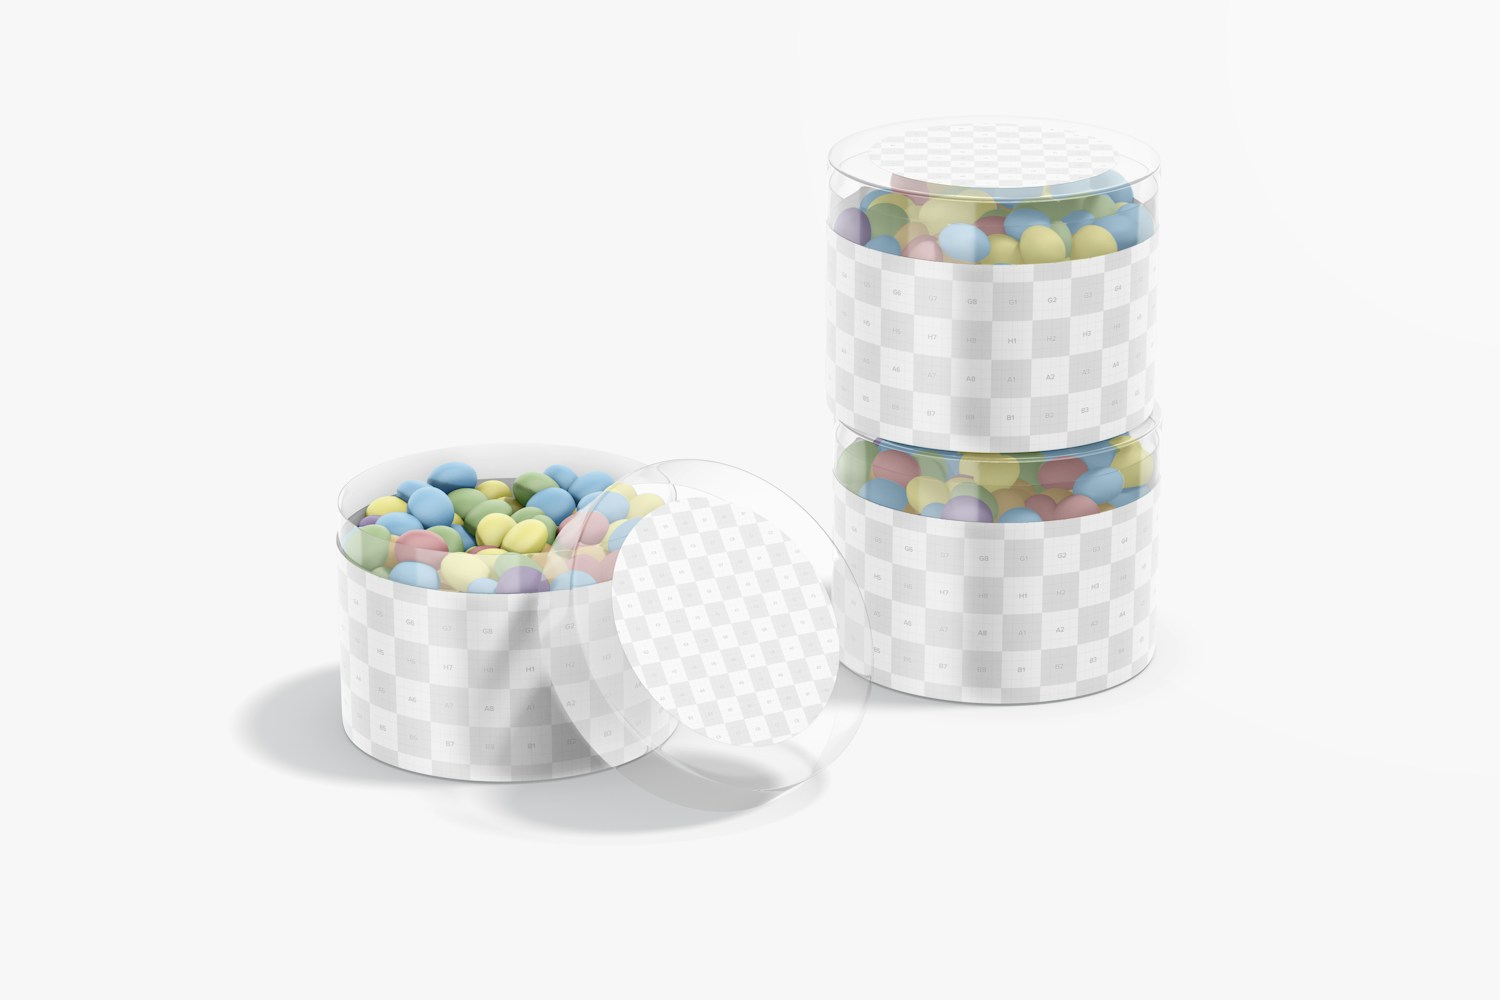 Plastic Round Boxes Mockup, Stacked